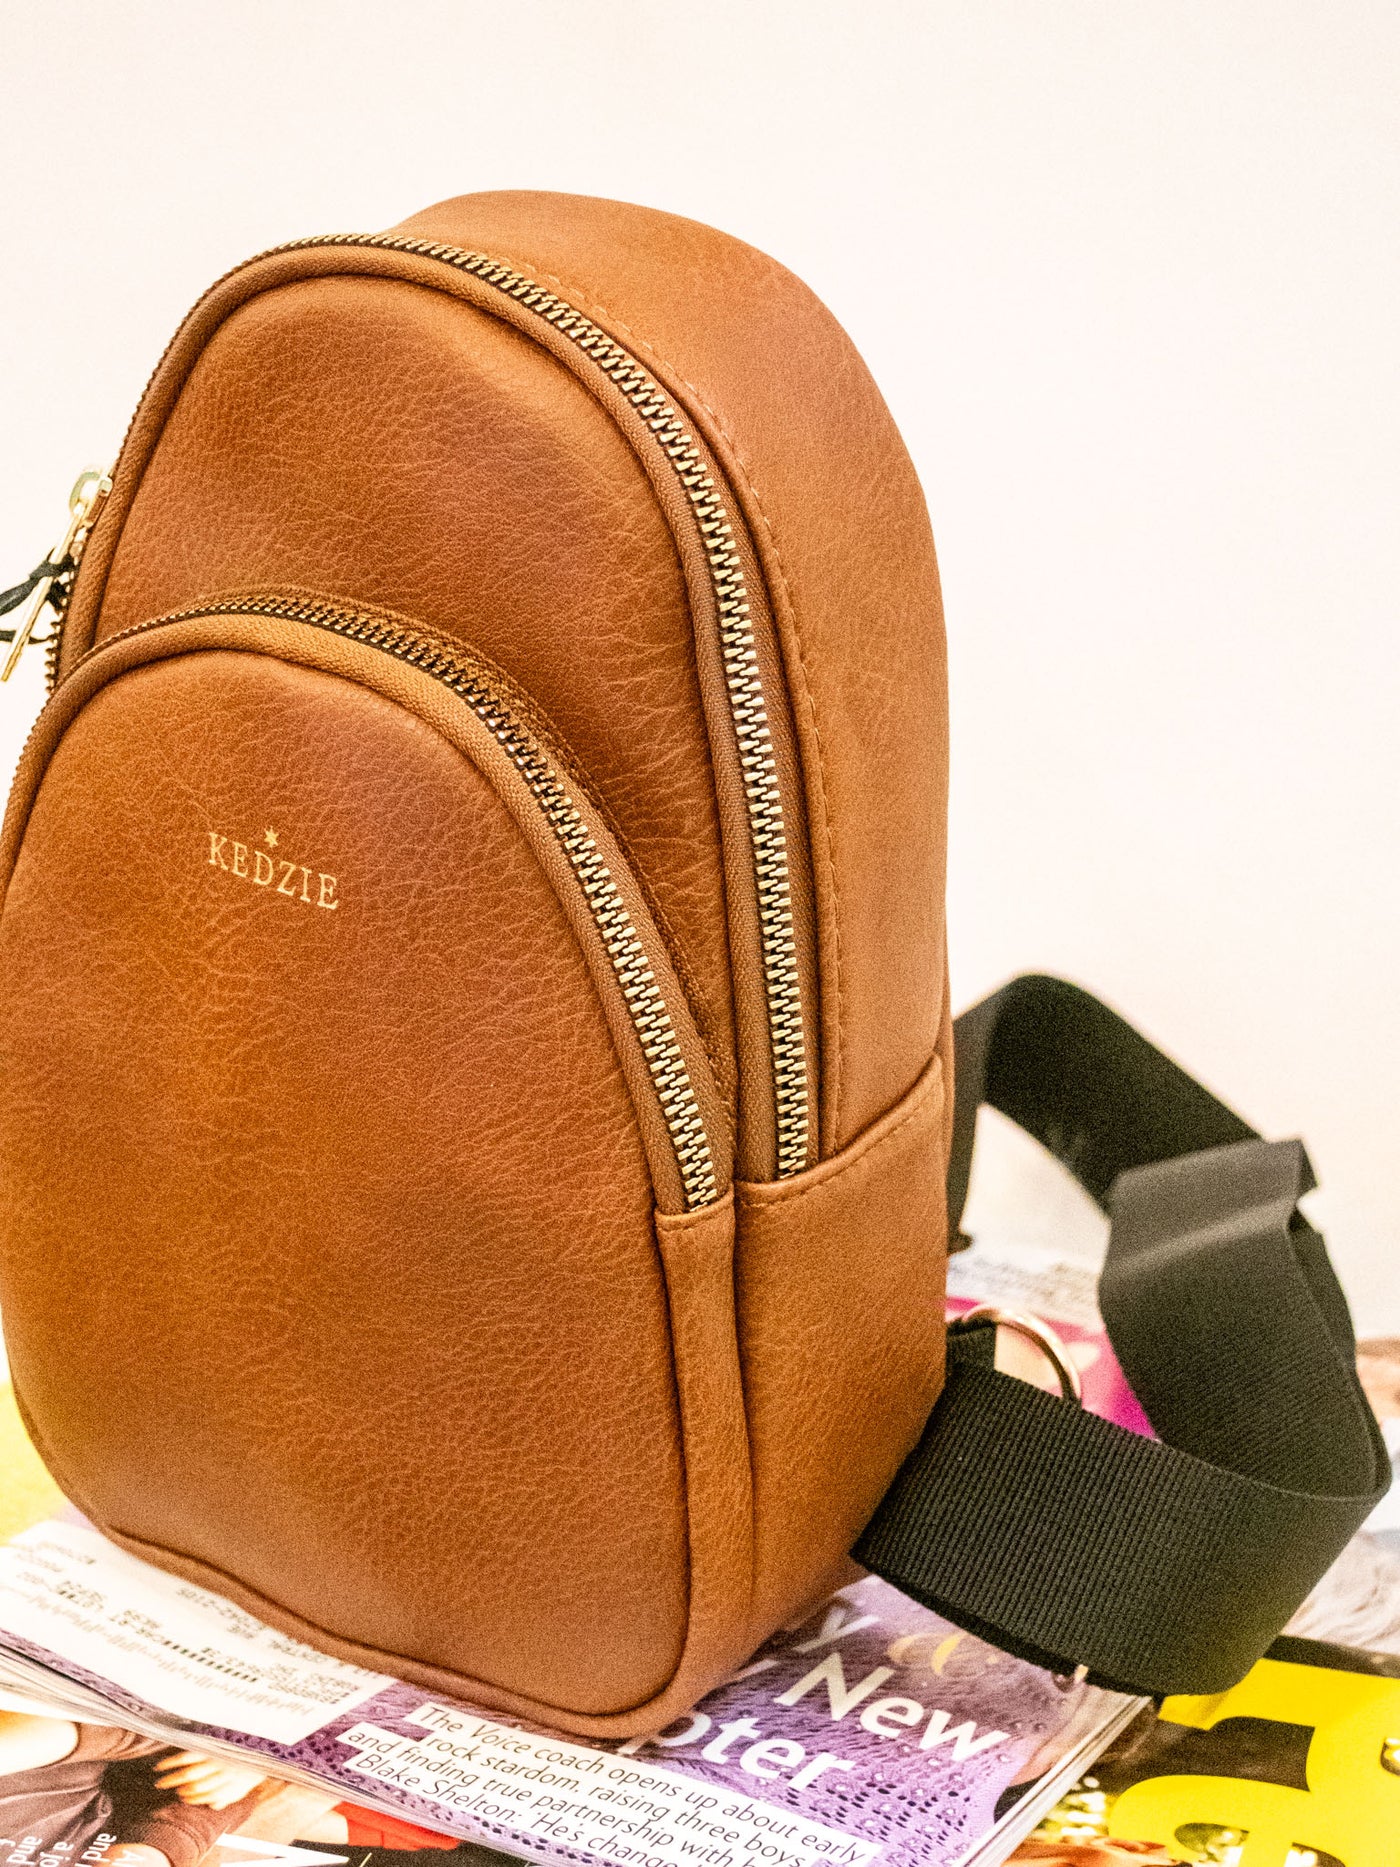 A brown vegan leather sling bag with two zipper pockets and a black strap.